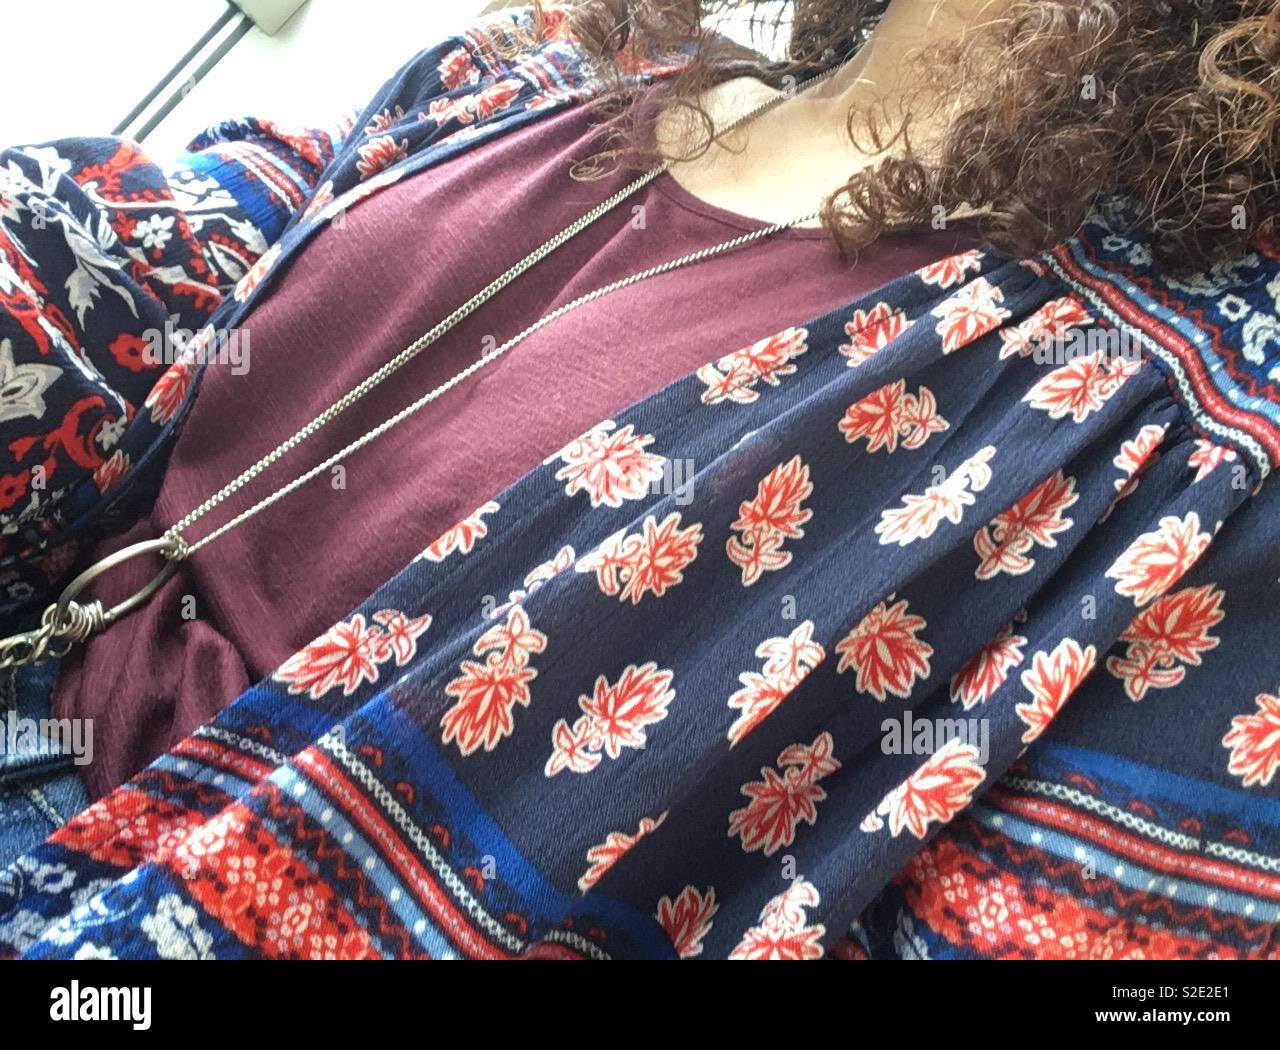 Dark brown curly haired female wearing long silver necklace against plum coloured T-shirt and blue red floral print soft jacket Stock Photo